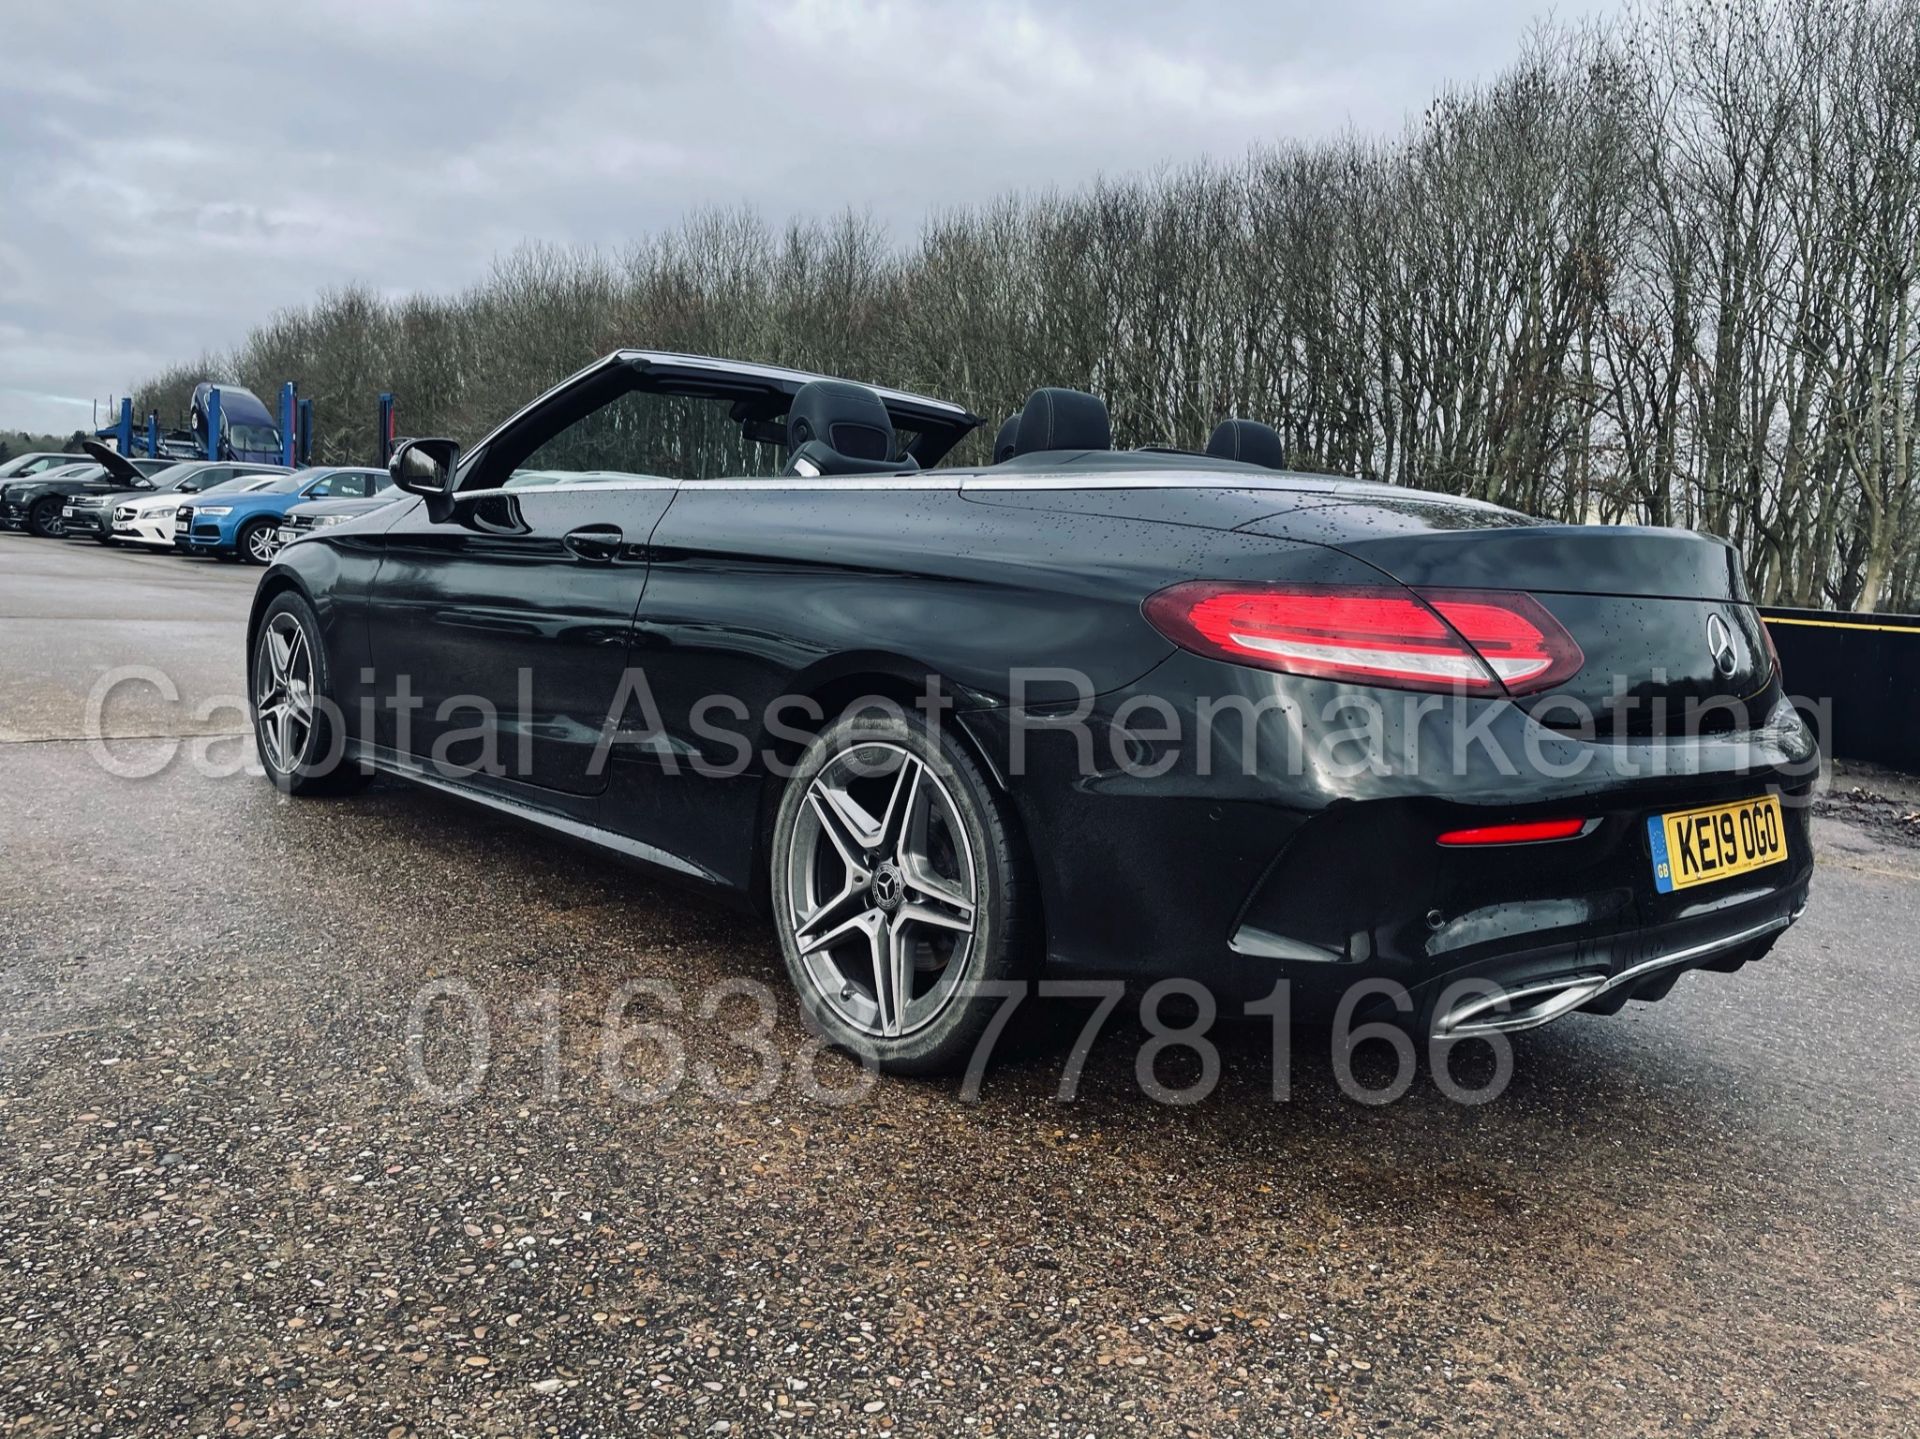 (ON SALE) MERCEDES-BENZ C220D *AMG LINE - CABRIOLET* (2019) '9G TRONIC AUTO - LEATHER - SAT NAV' - Image 9 of 56